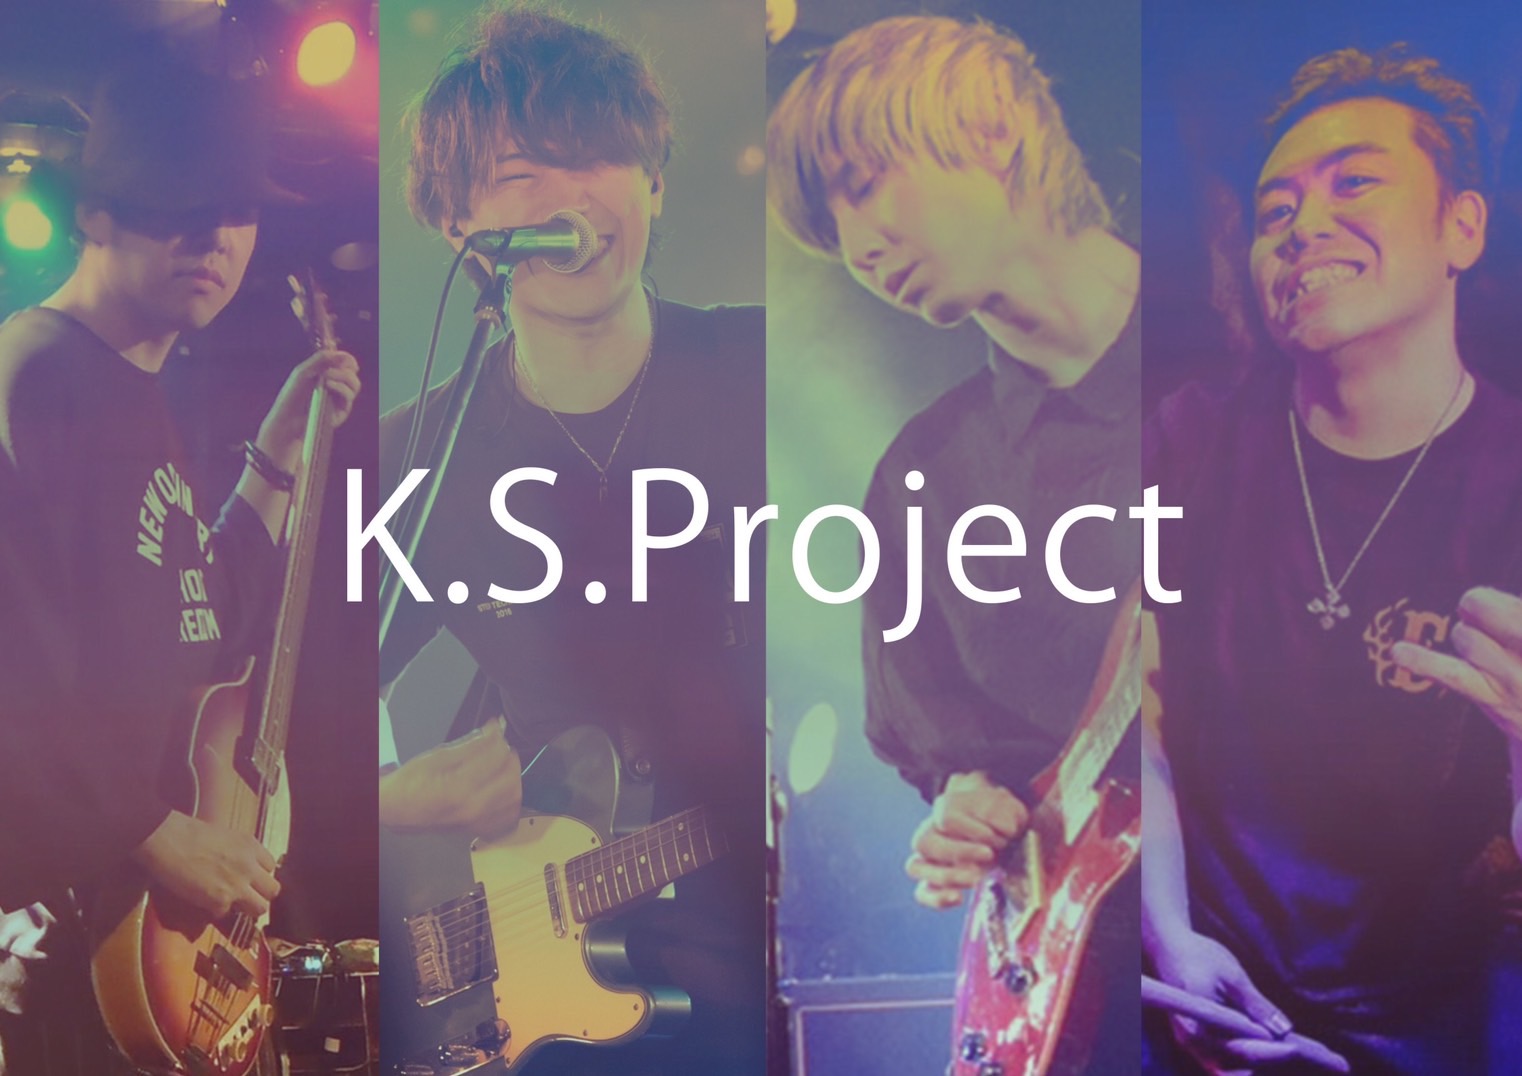 K.S.Project